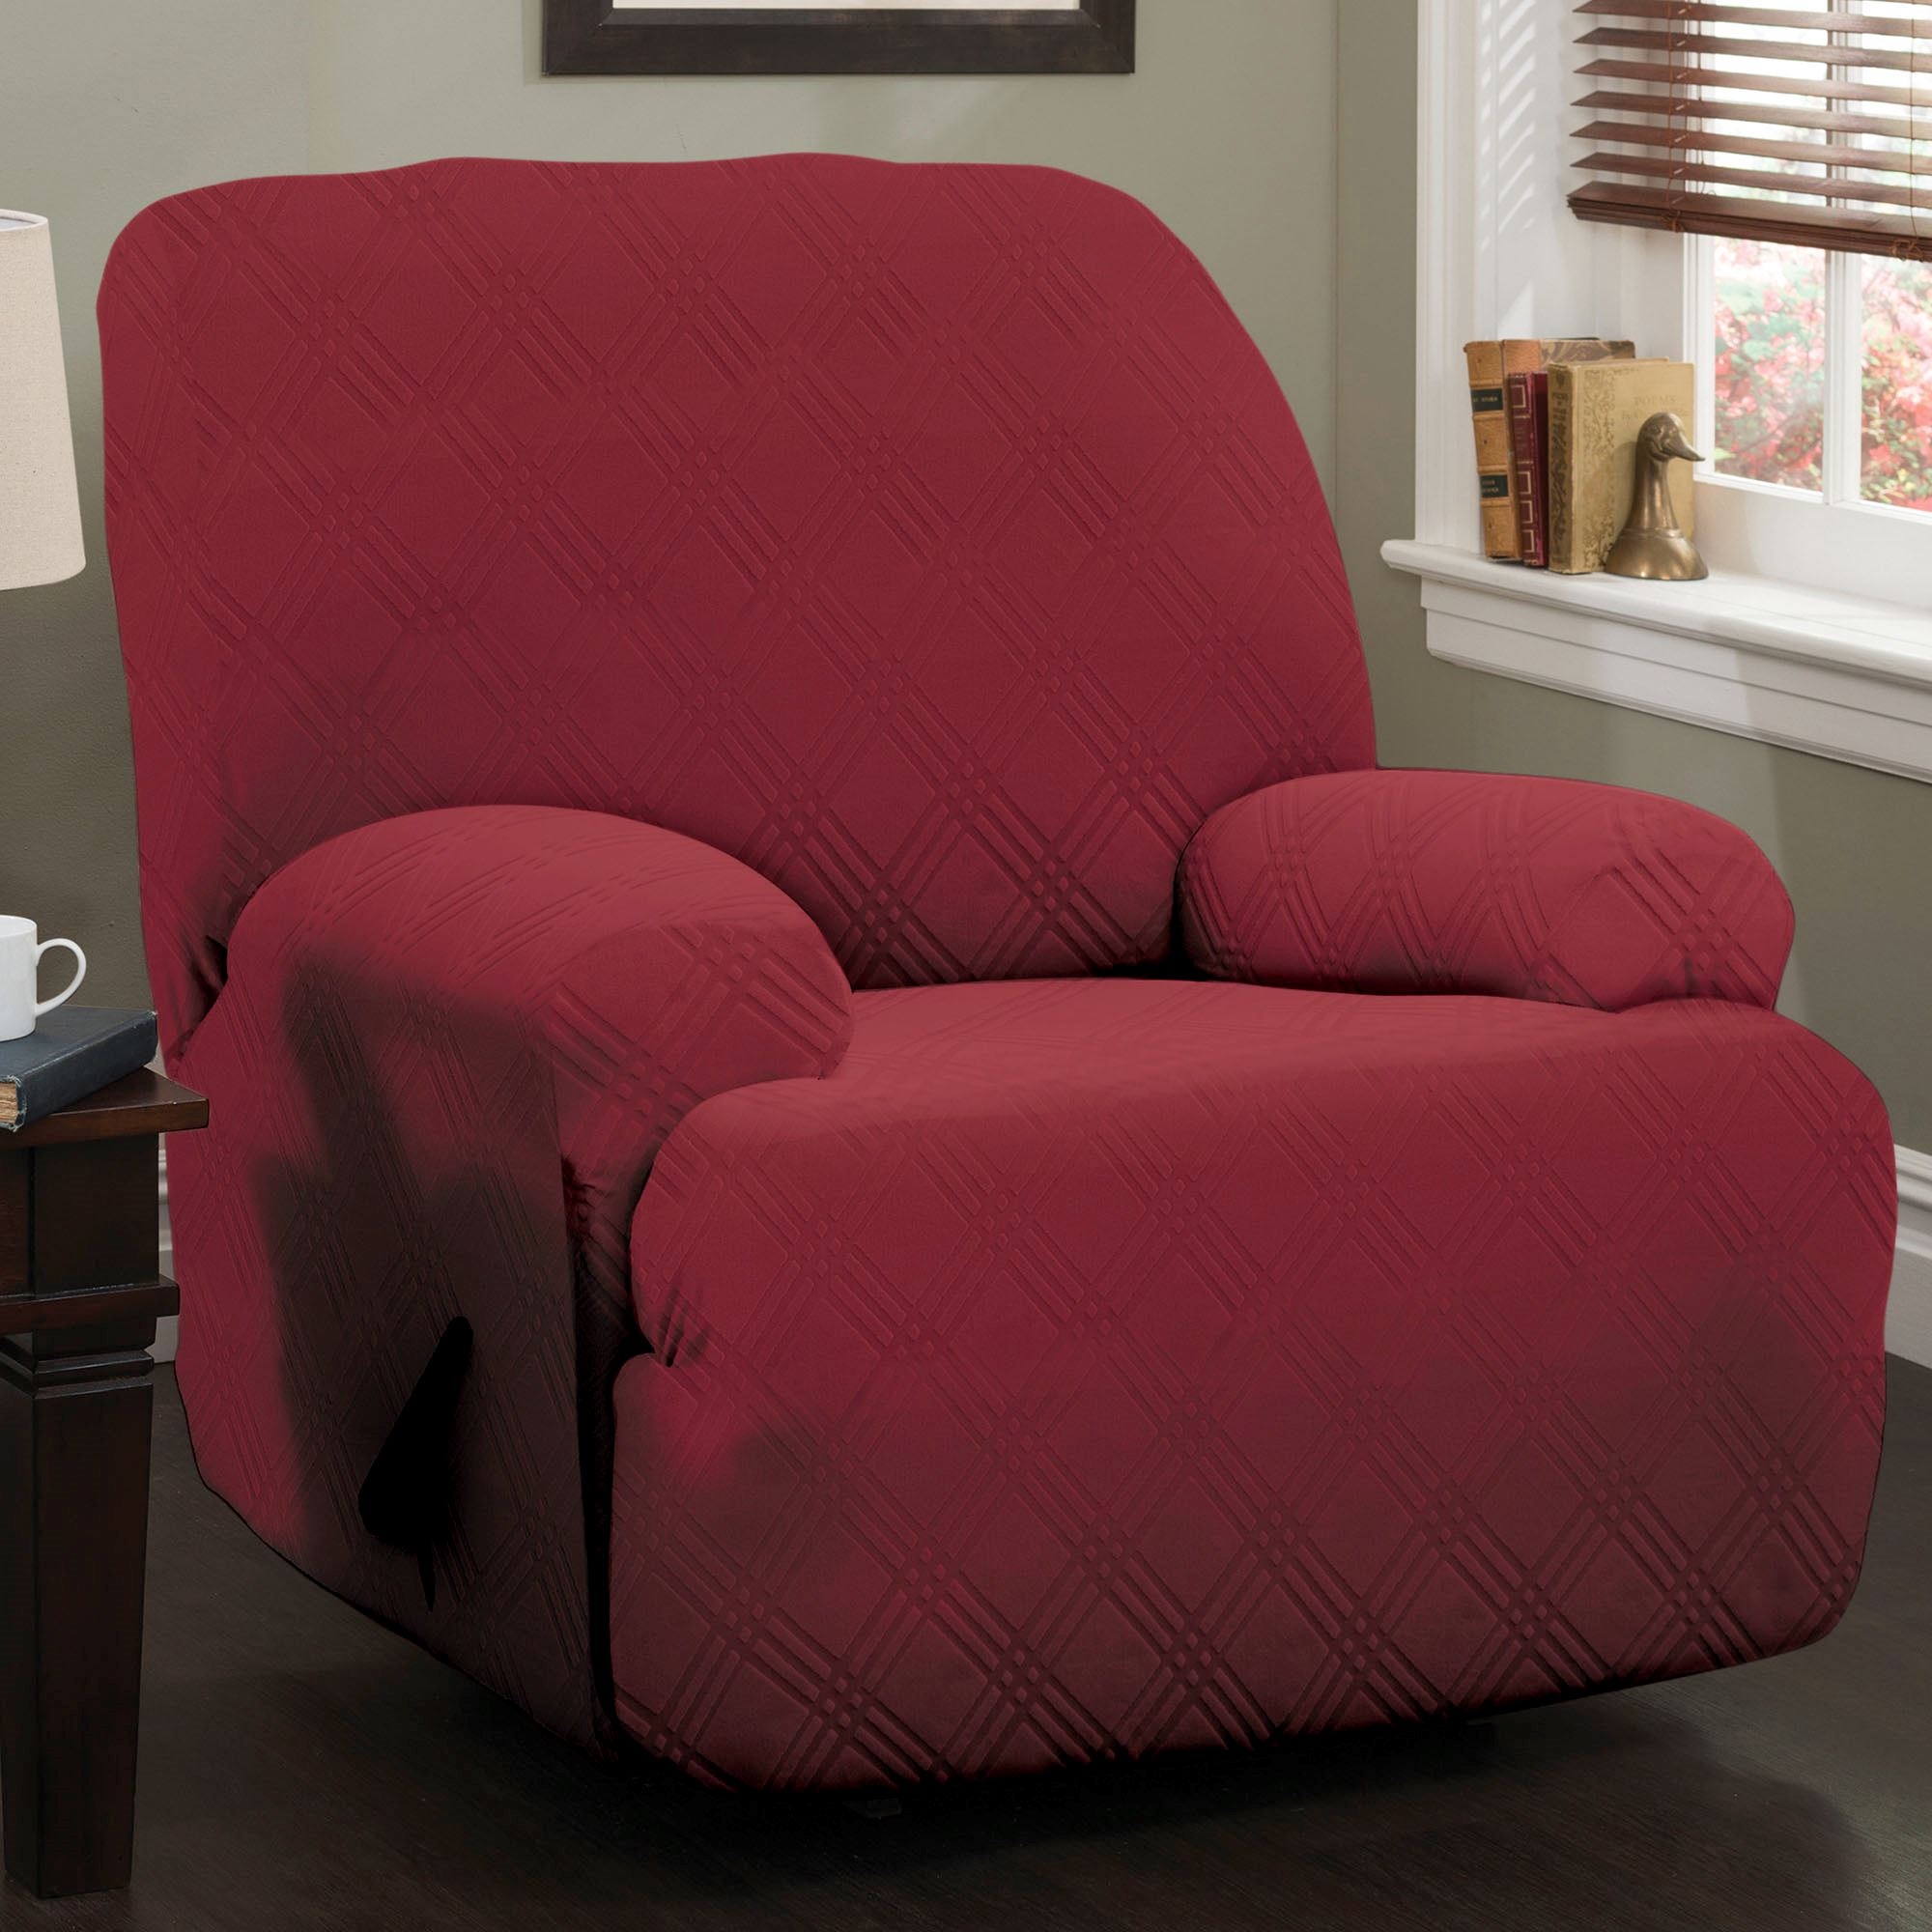 ON SALE !! JERSEY RECLINER COVER---LAZY BOY---RED---9 SOLID COLORS & 3 PRINTS 